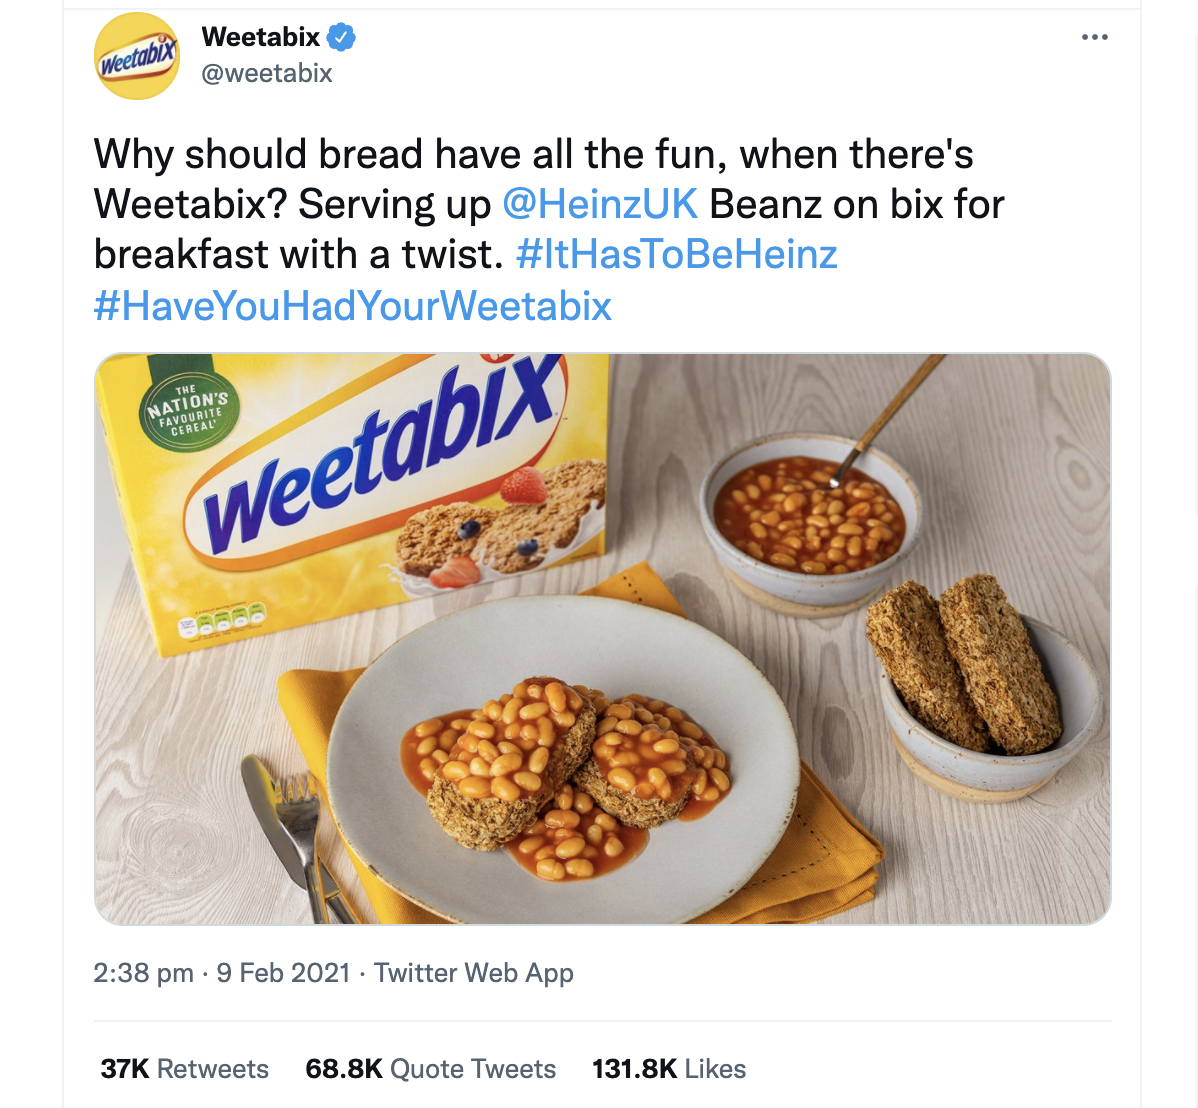 Brand interactions on Twitter